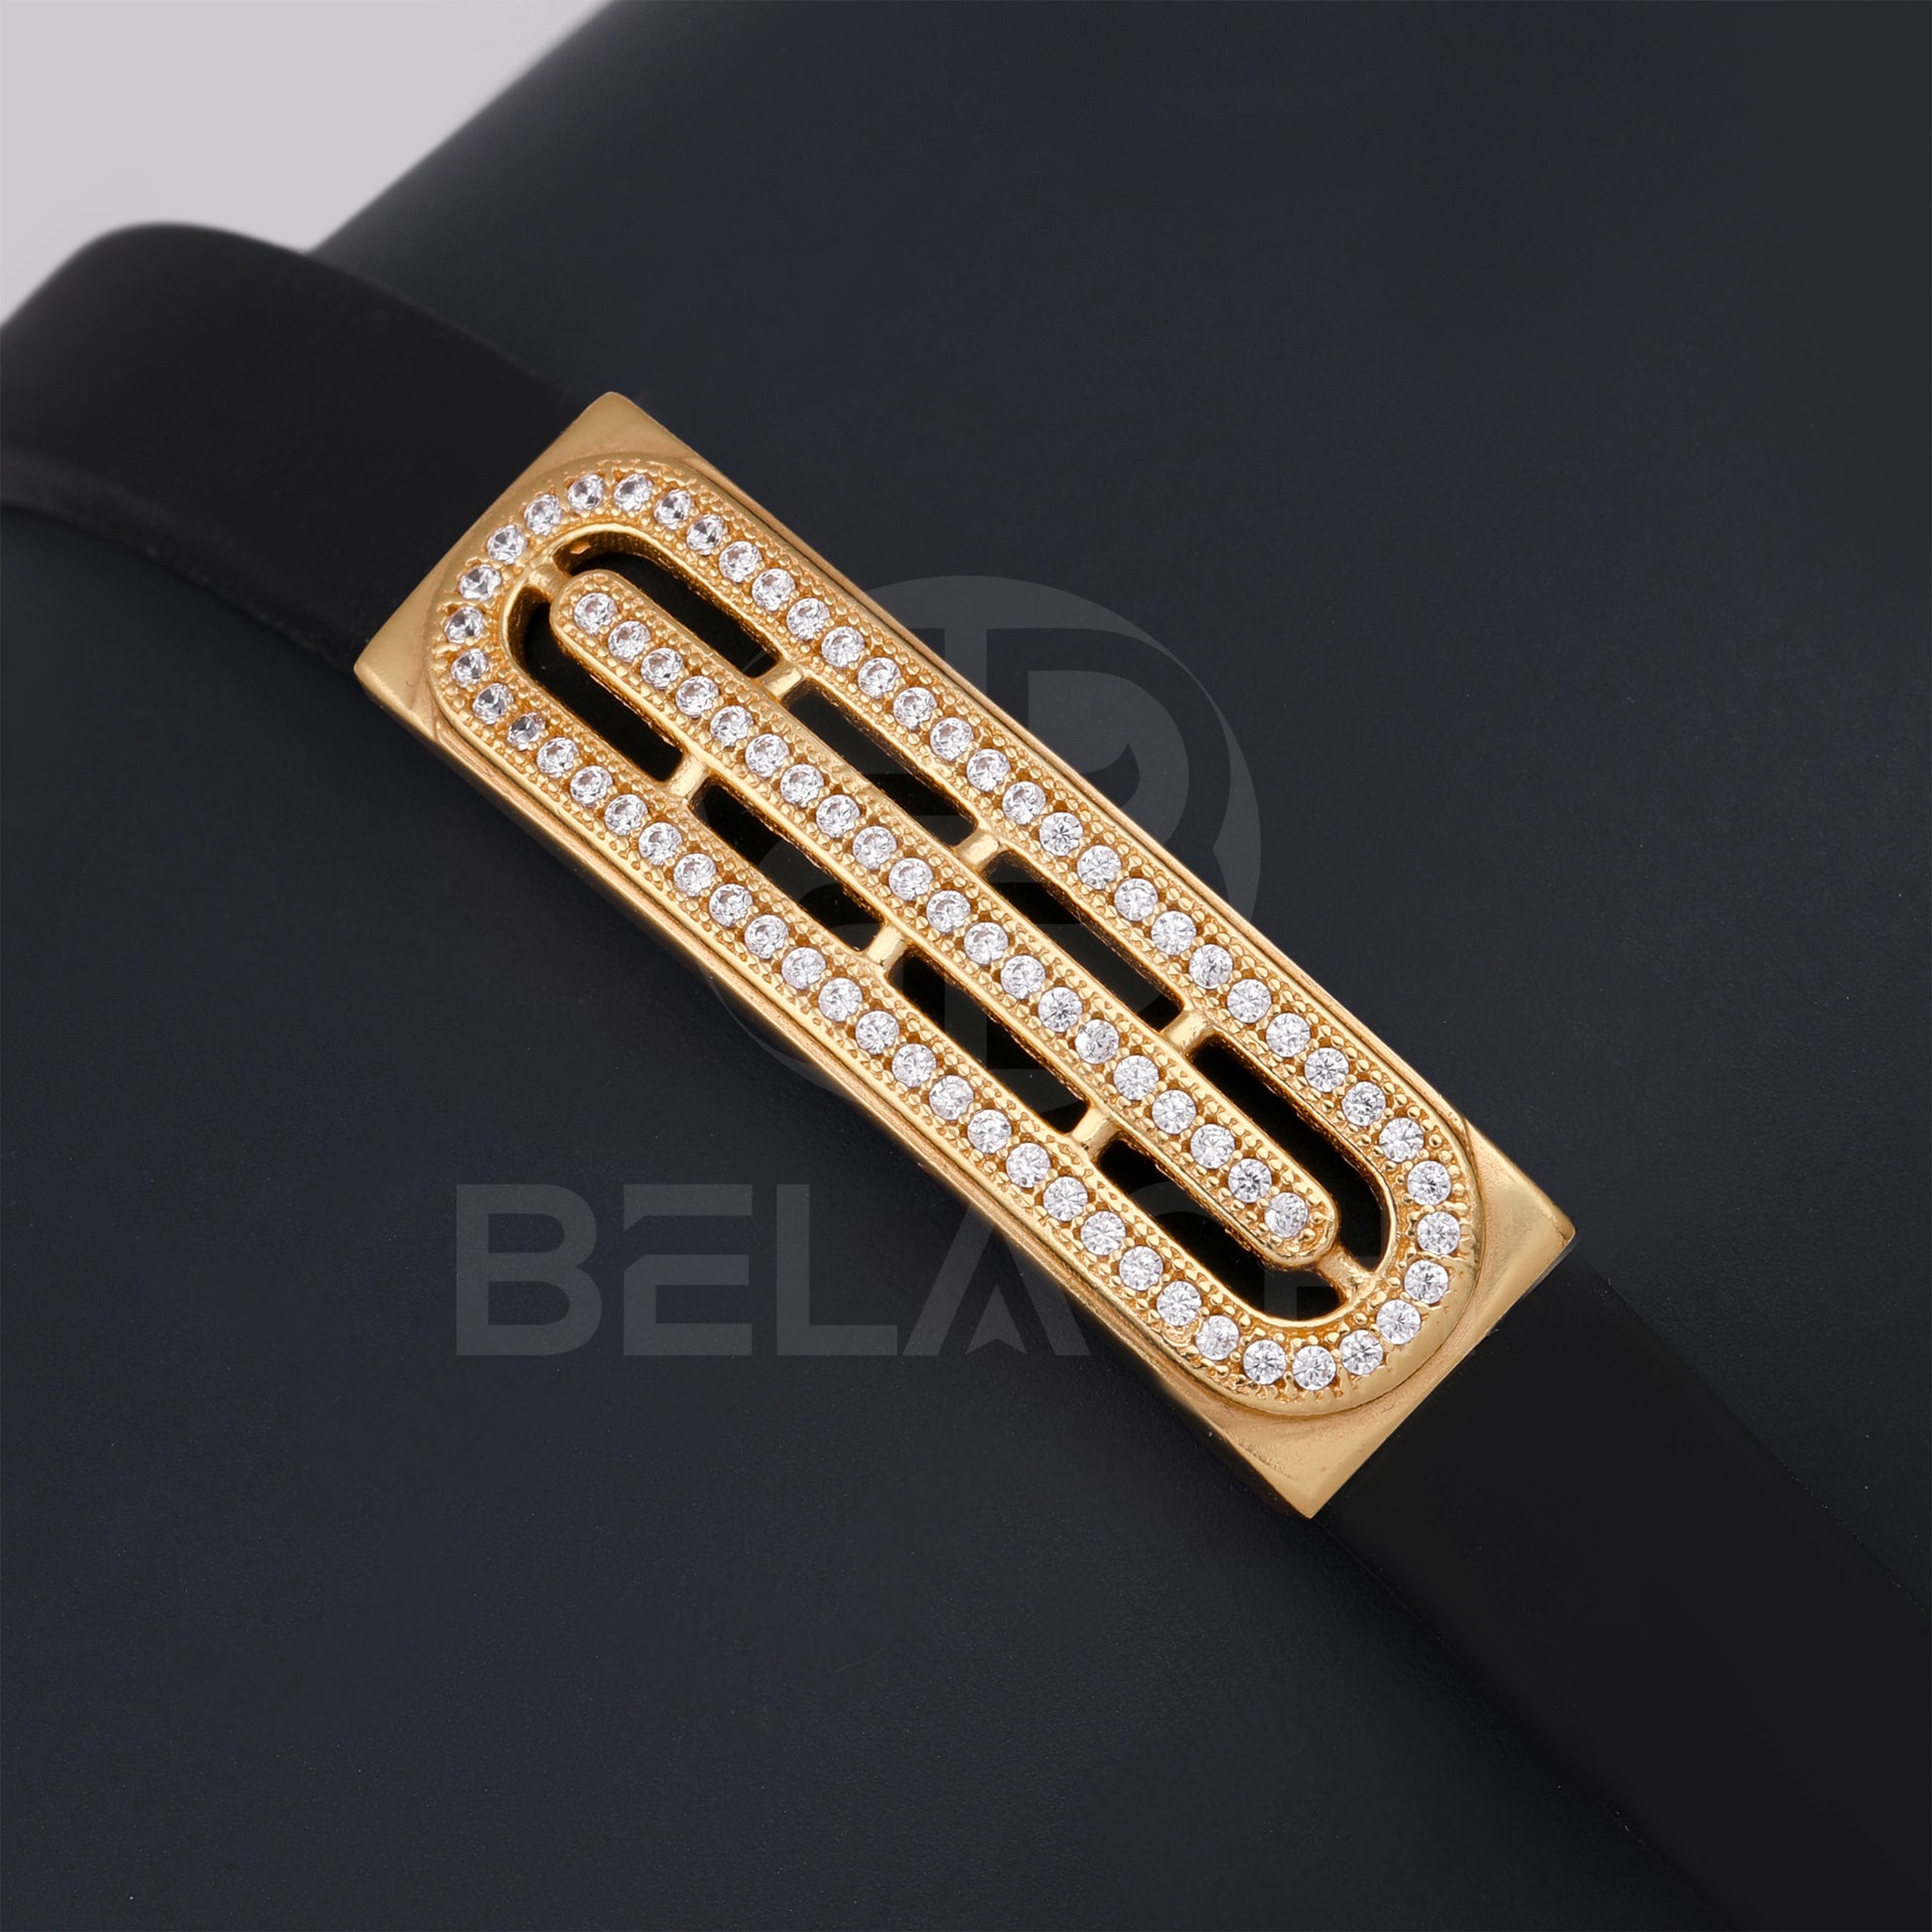 Gold Plated Optic With Diamond In Black Silicone Bracelet